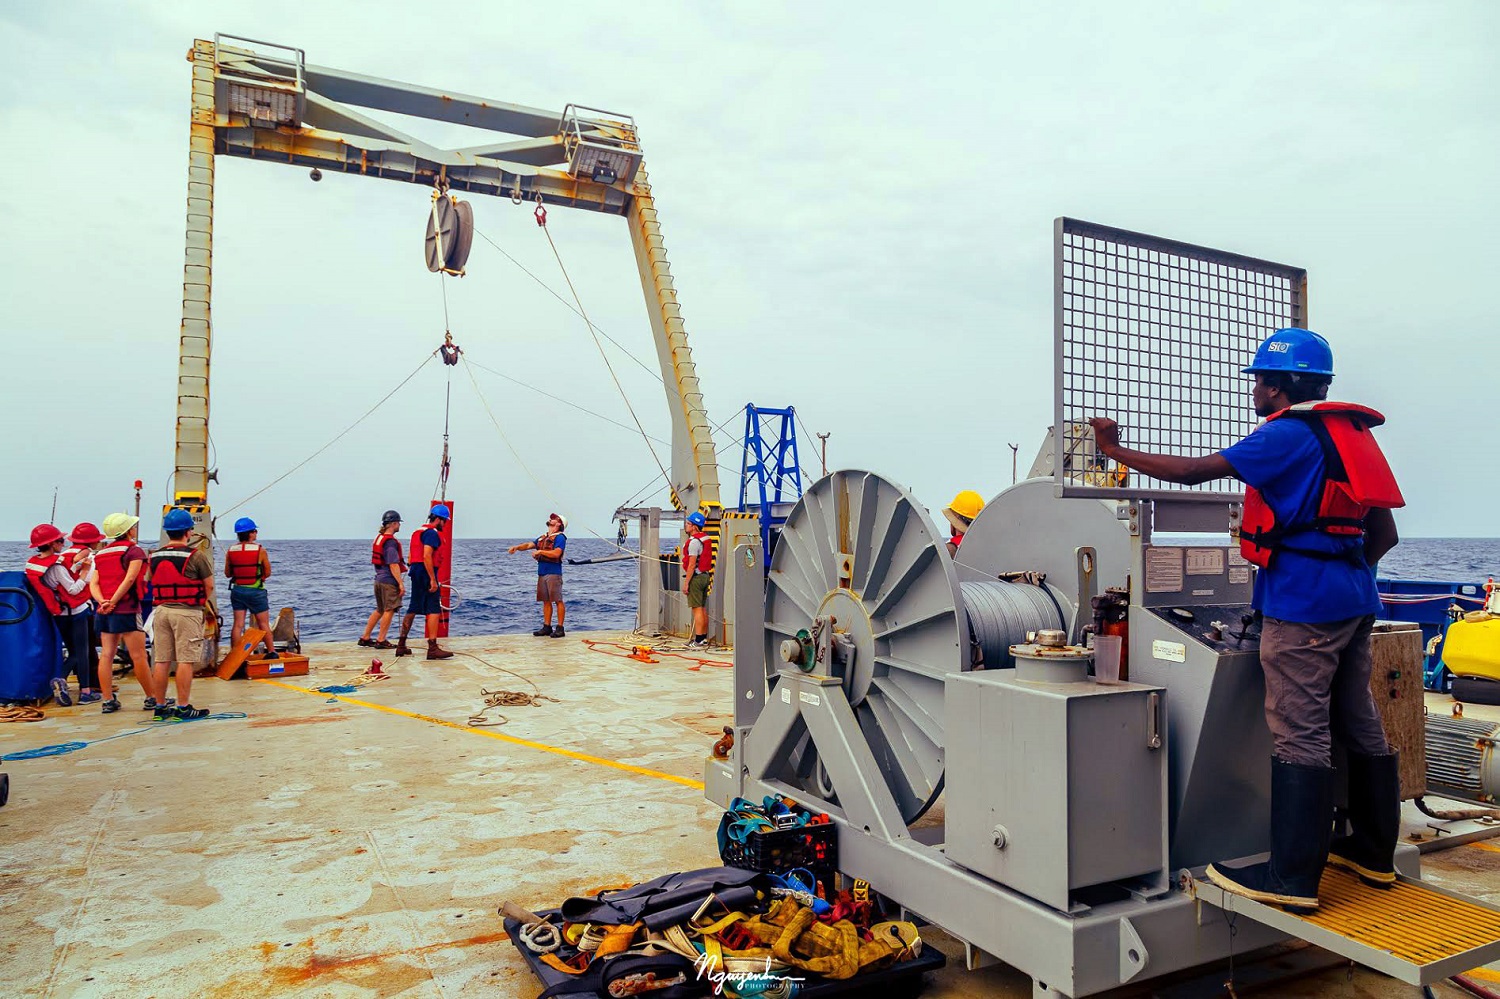 U.S. and Indian scientists aboard the research vessel R/V Roger Revelle deploy a drifting spar buoy to measure upper ocean density and velocity in the Bay of Bengal. The month-long, ONR-sponsored mission centered on monsoon prediction. Photo courtesy of the R/V Roger Revelle 